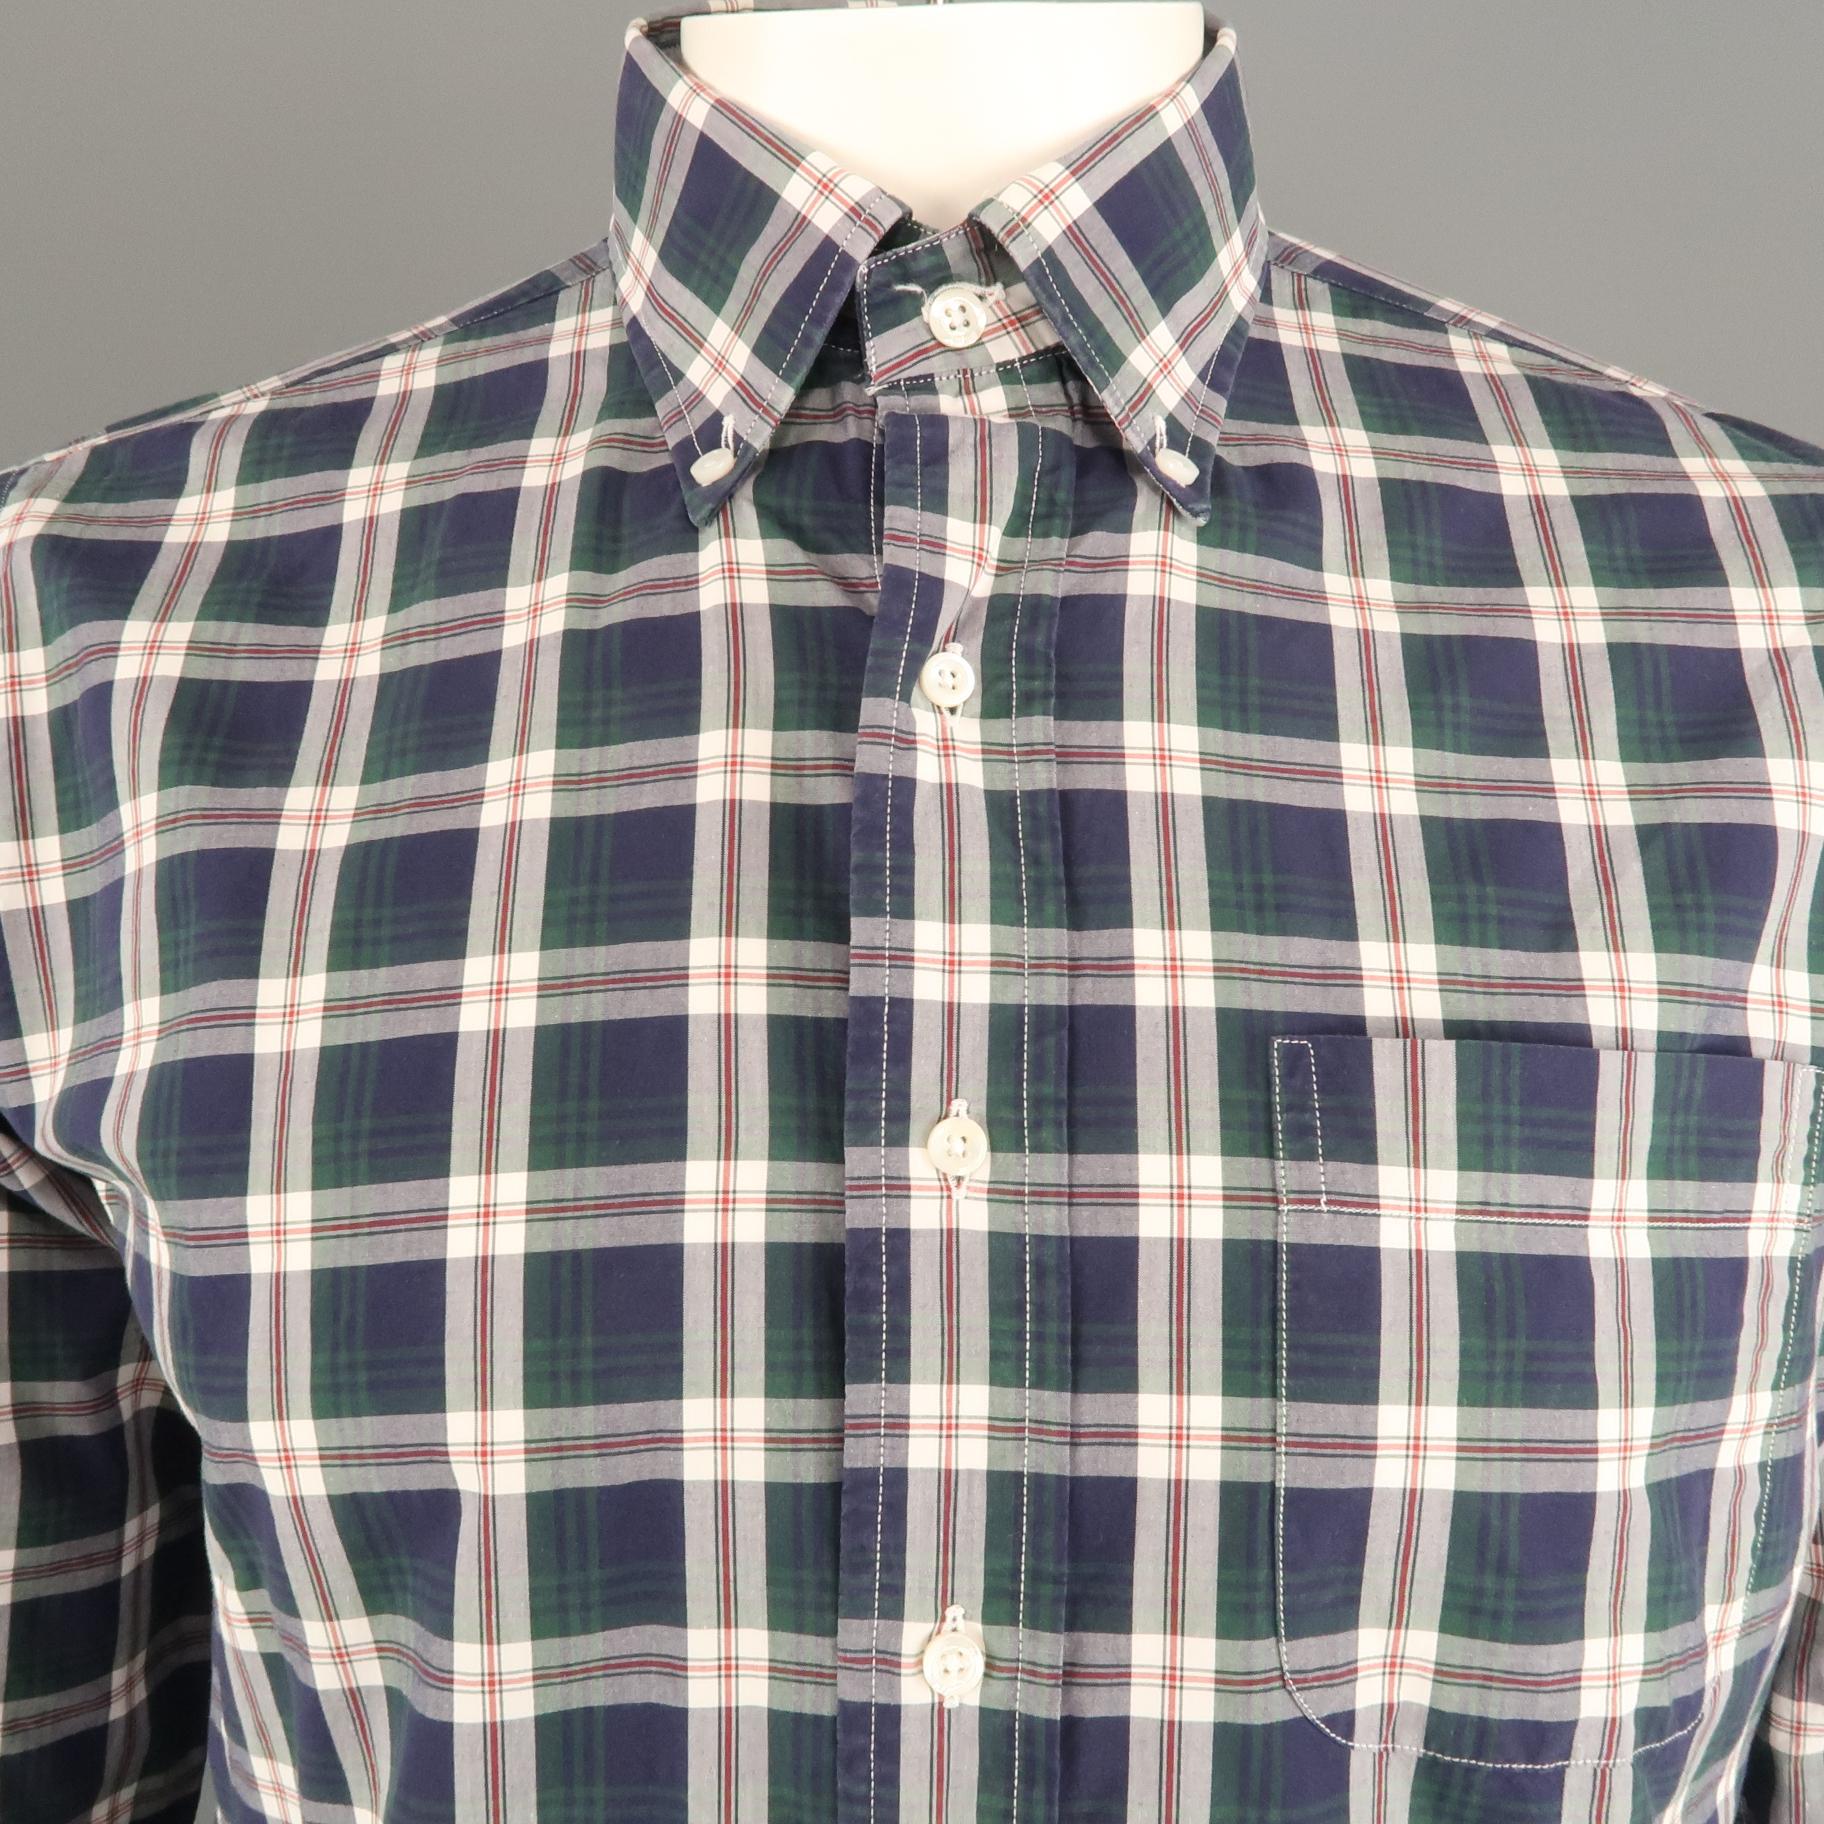 THOM BROWNE long sleeve shirt comes in a navy and green plaid cotton featuring a classic button down collar and a front patch pocket. Made in USA.
 
Excellent Pre-Owned Condition.
Marked: 4
 
Measurements:
 
Shoulder: 17.5 in.
Chest: 46 in.
Sleeve: